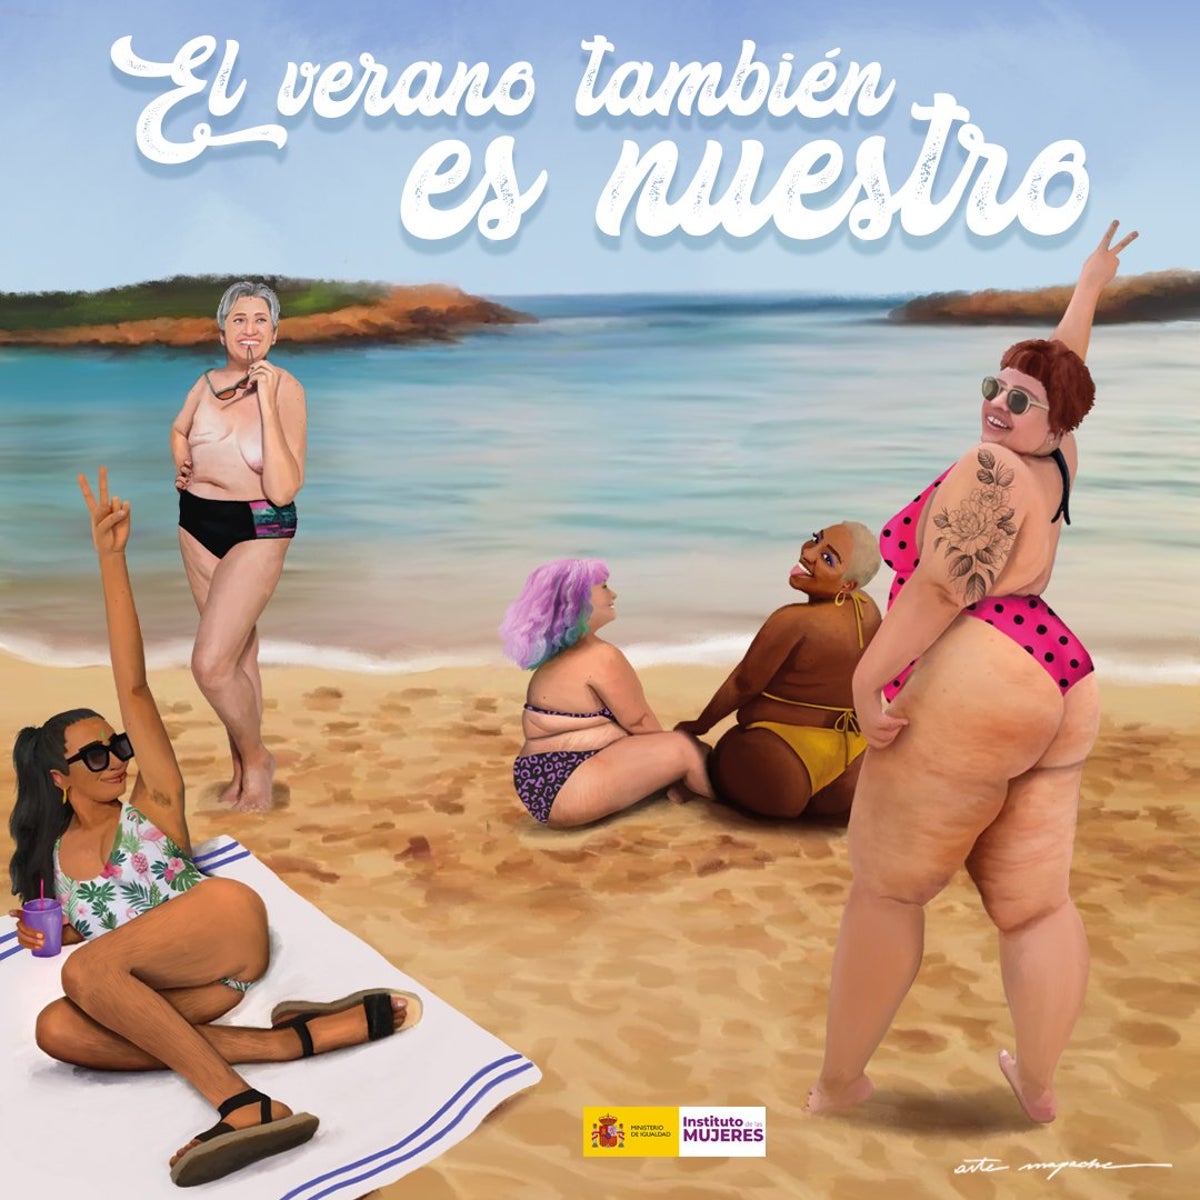 Amputee model says Spanish beach body positivity campaign stole her image – and photoshopped her leg